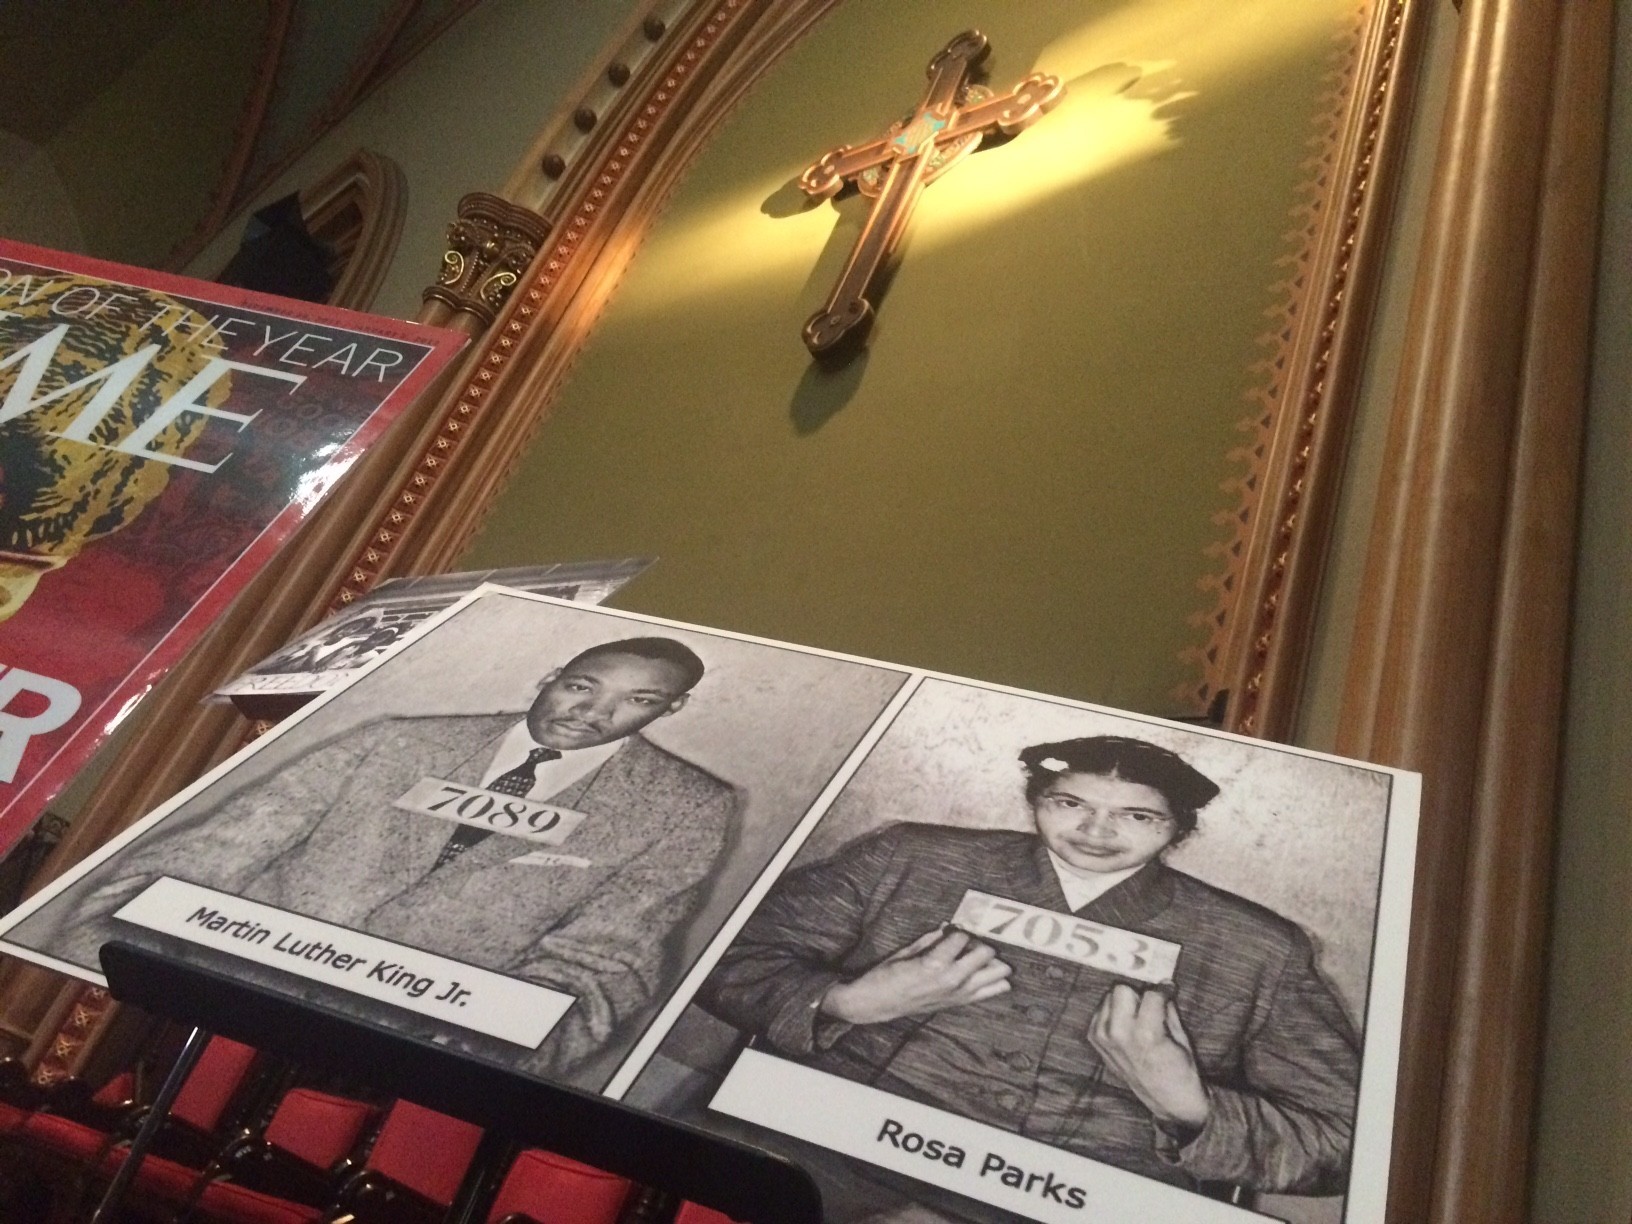 Mugshots of Martin Luther King Jr. and Rosa Parks at Arch Street United Methodist Church in Philadelphia